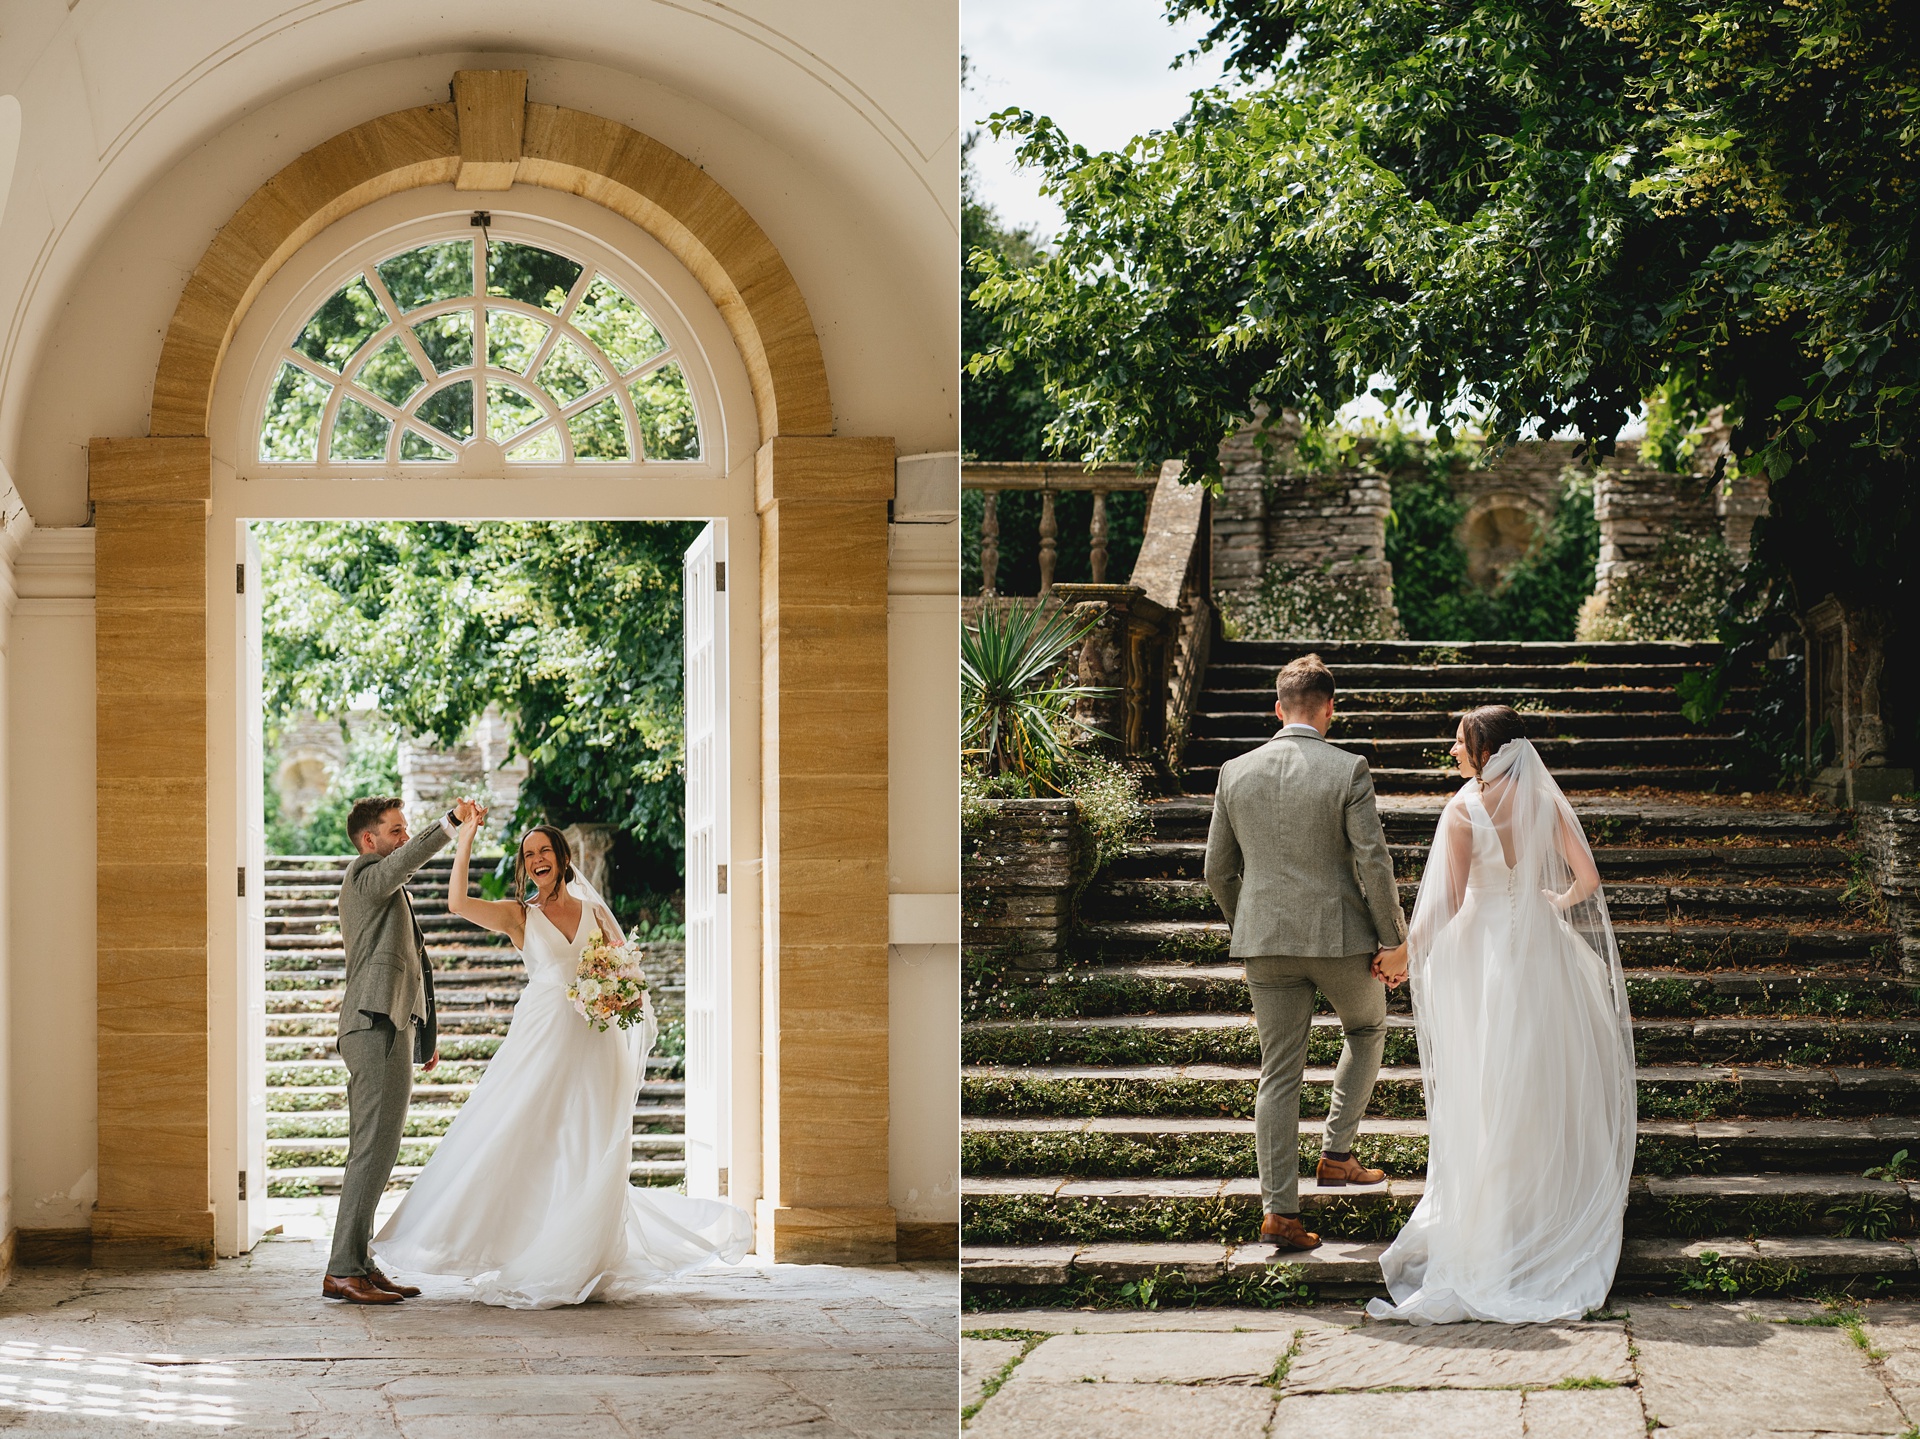 A bride and groom in the orangery and walking up stone steps at Hestercombe